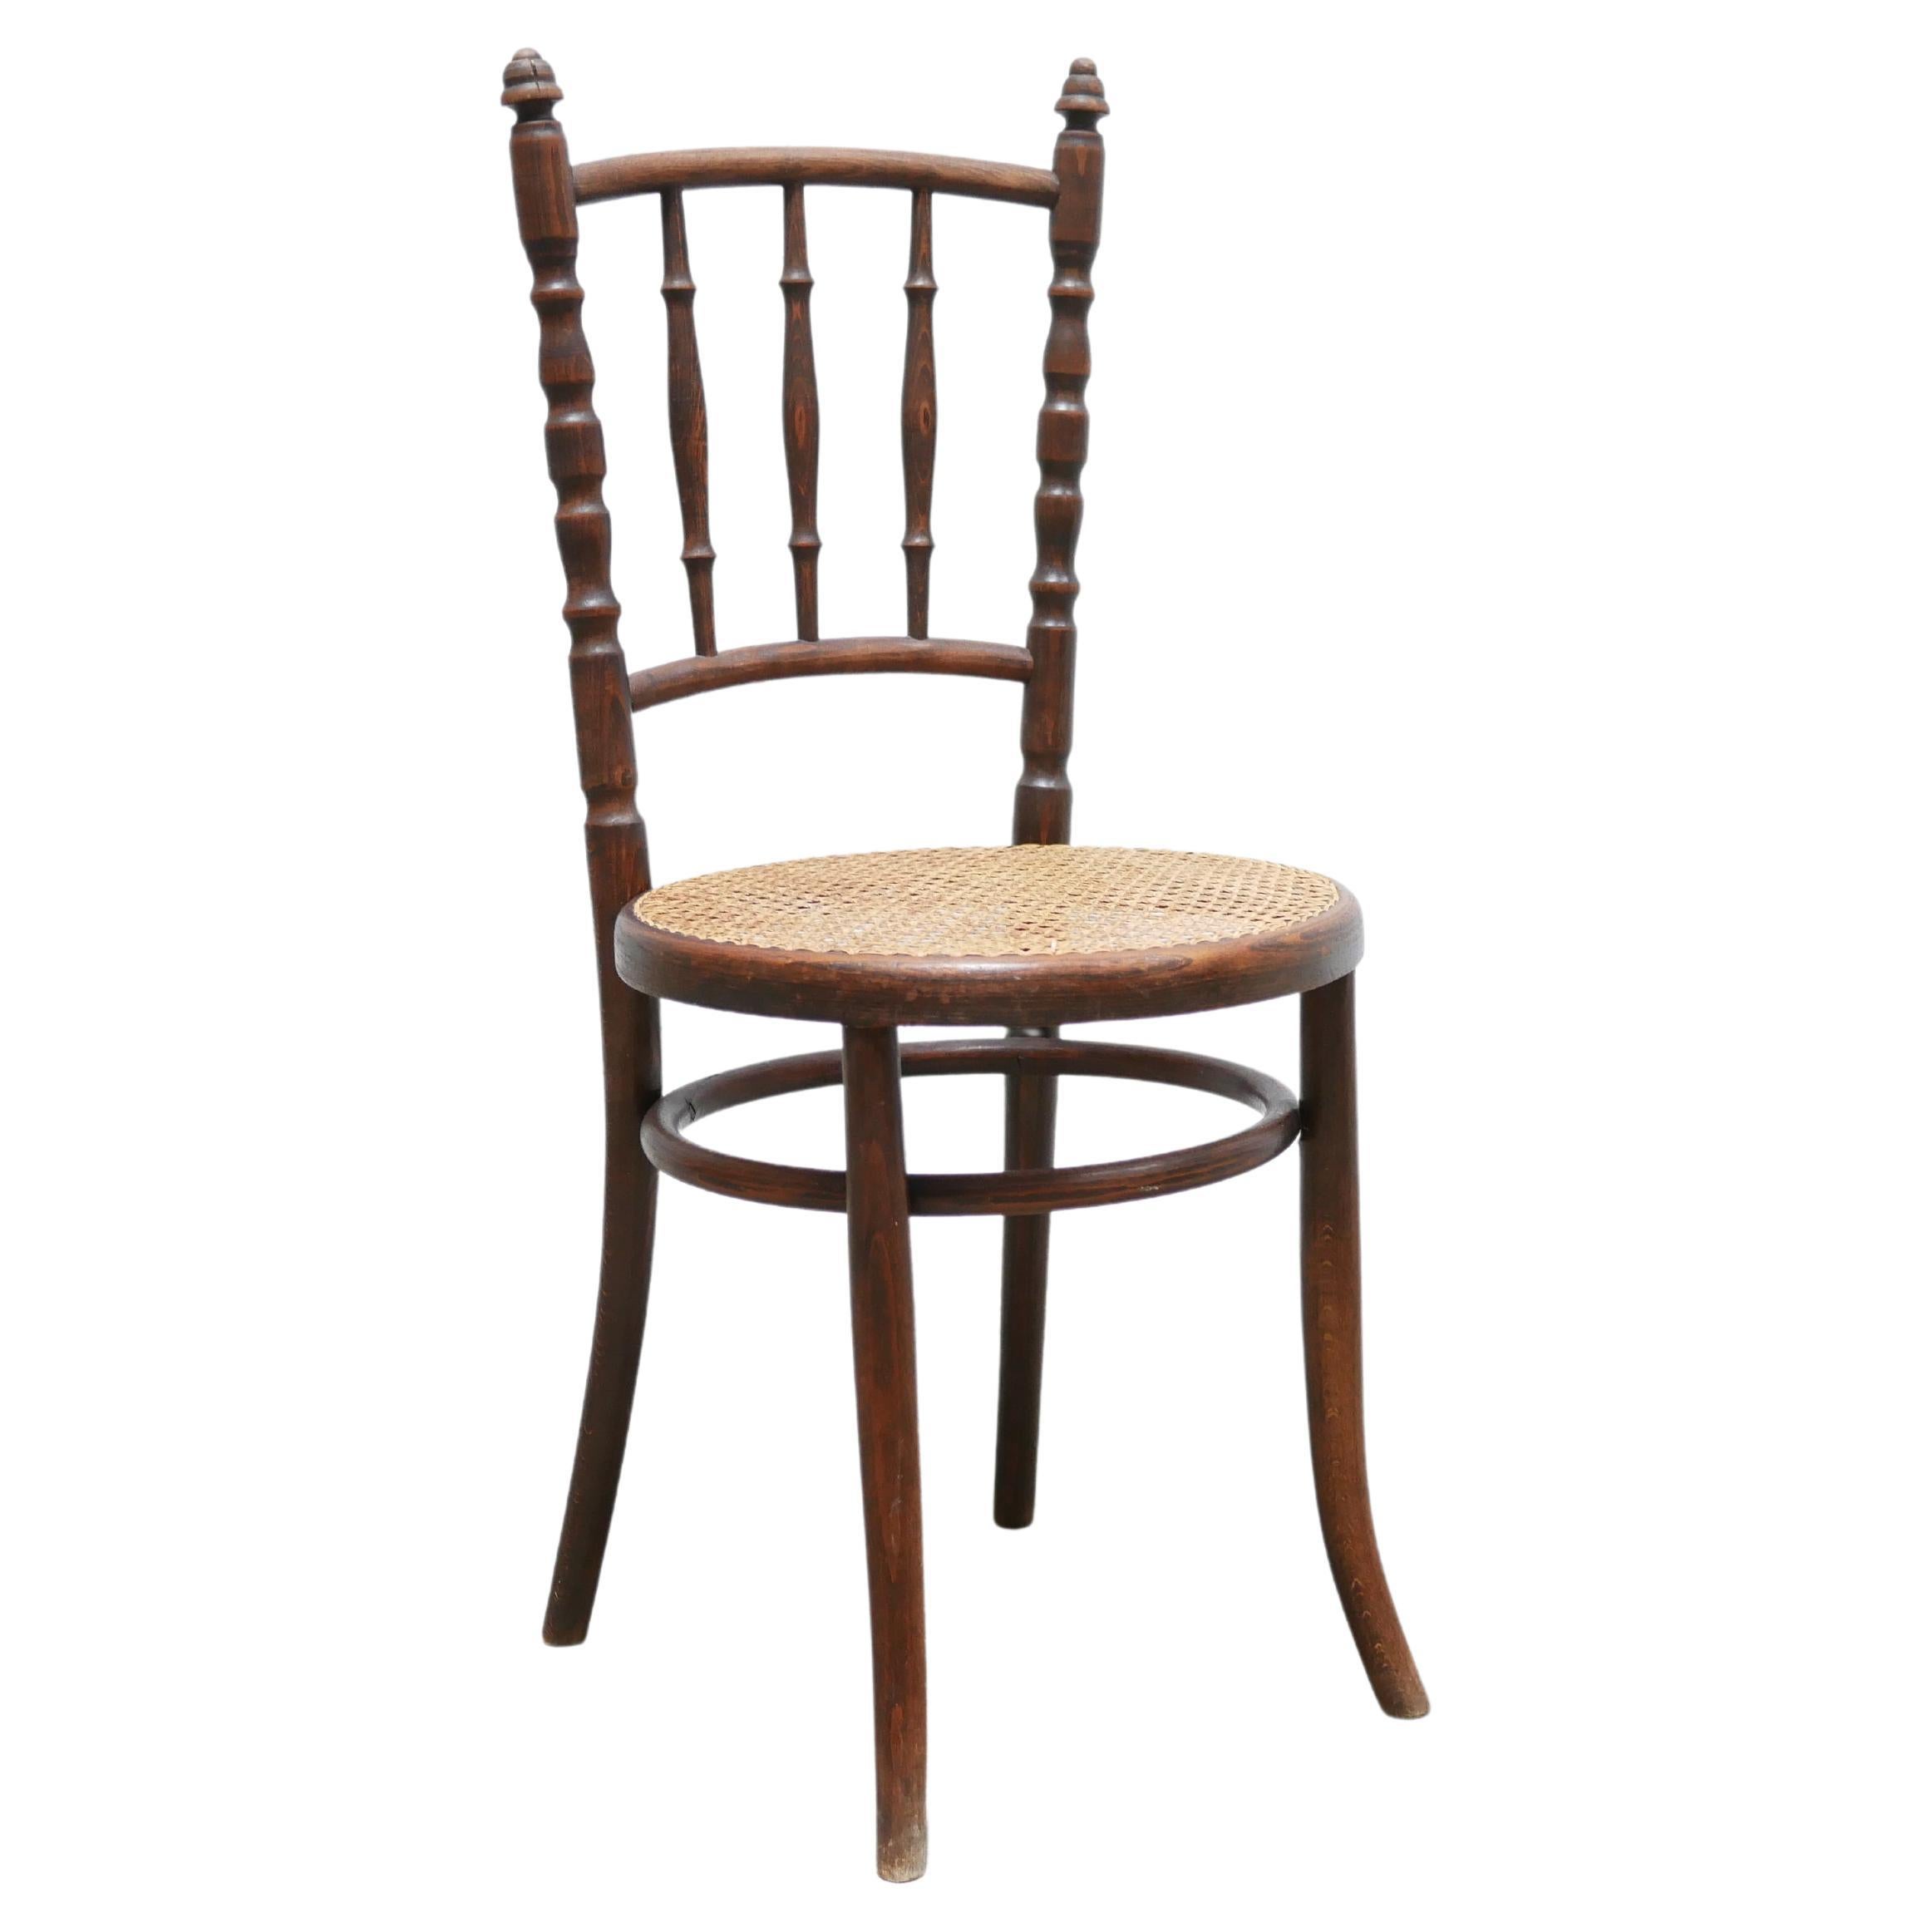 Old Cane Bistro Chair in Wood by Fischel Editions